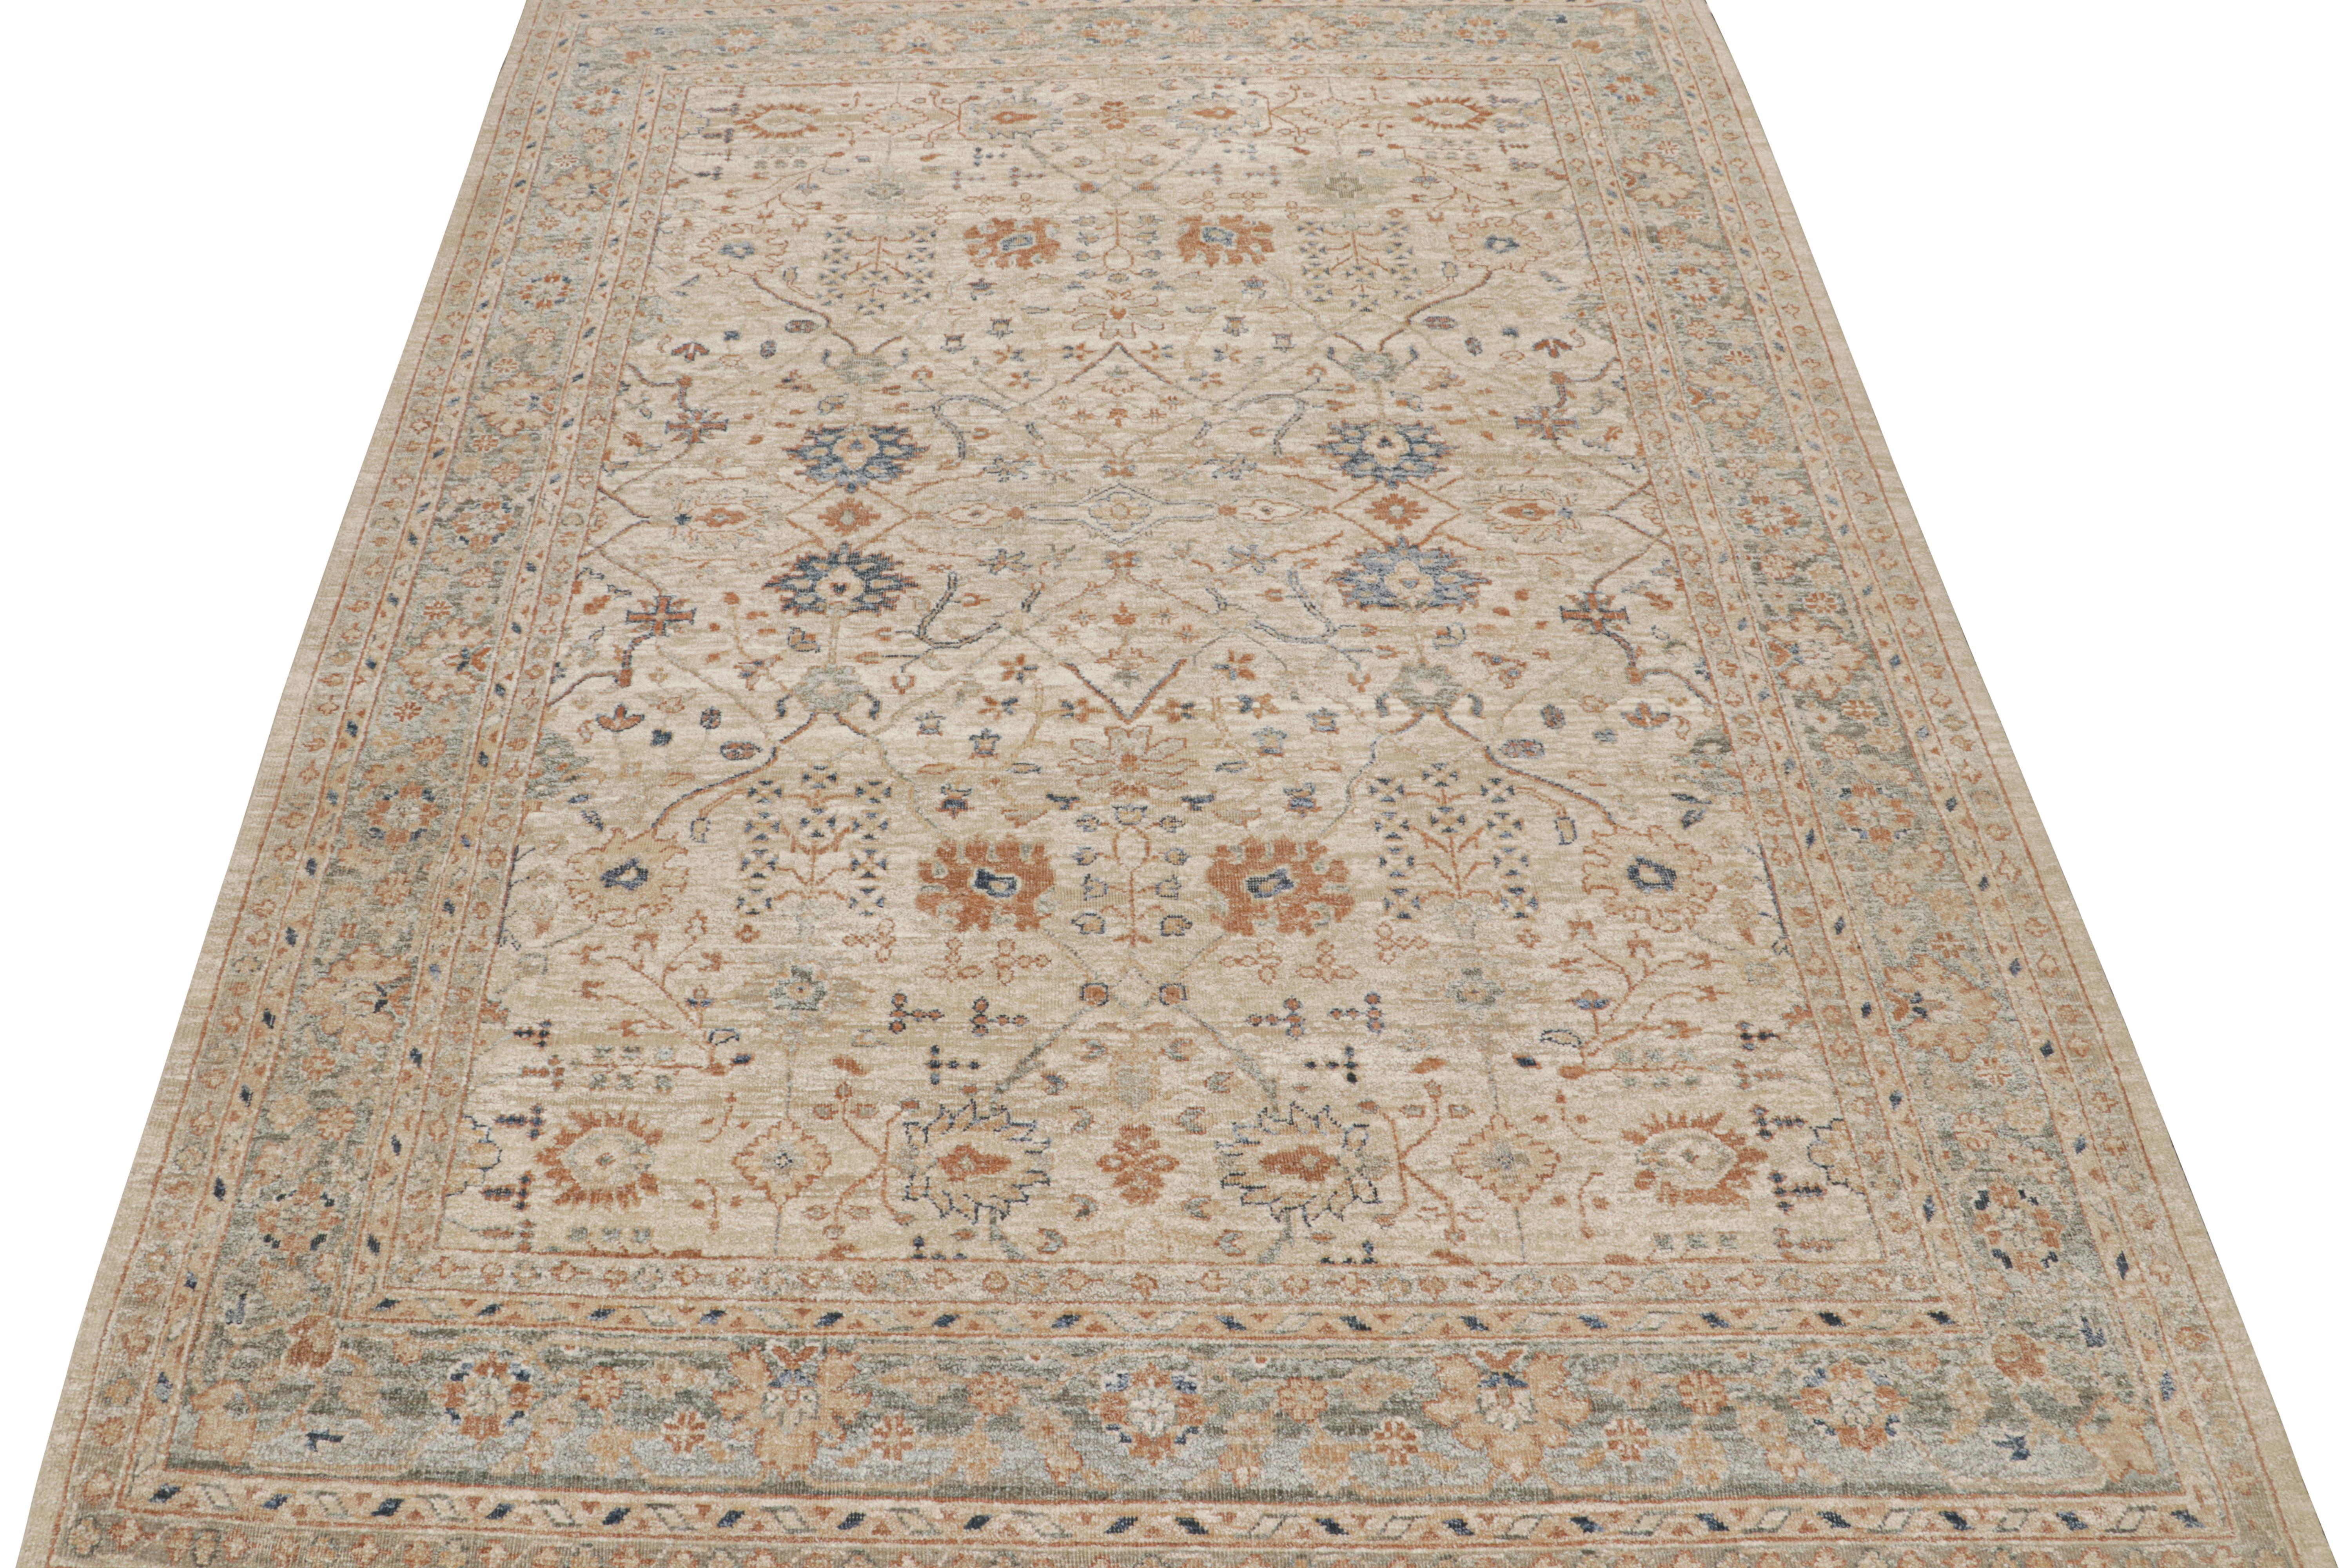 Indian Rug & Kilim’s Oushak Style Rug in Cream, Blue, Beige-Brown Geometric Patterns For Sale